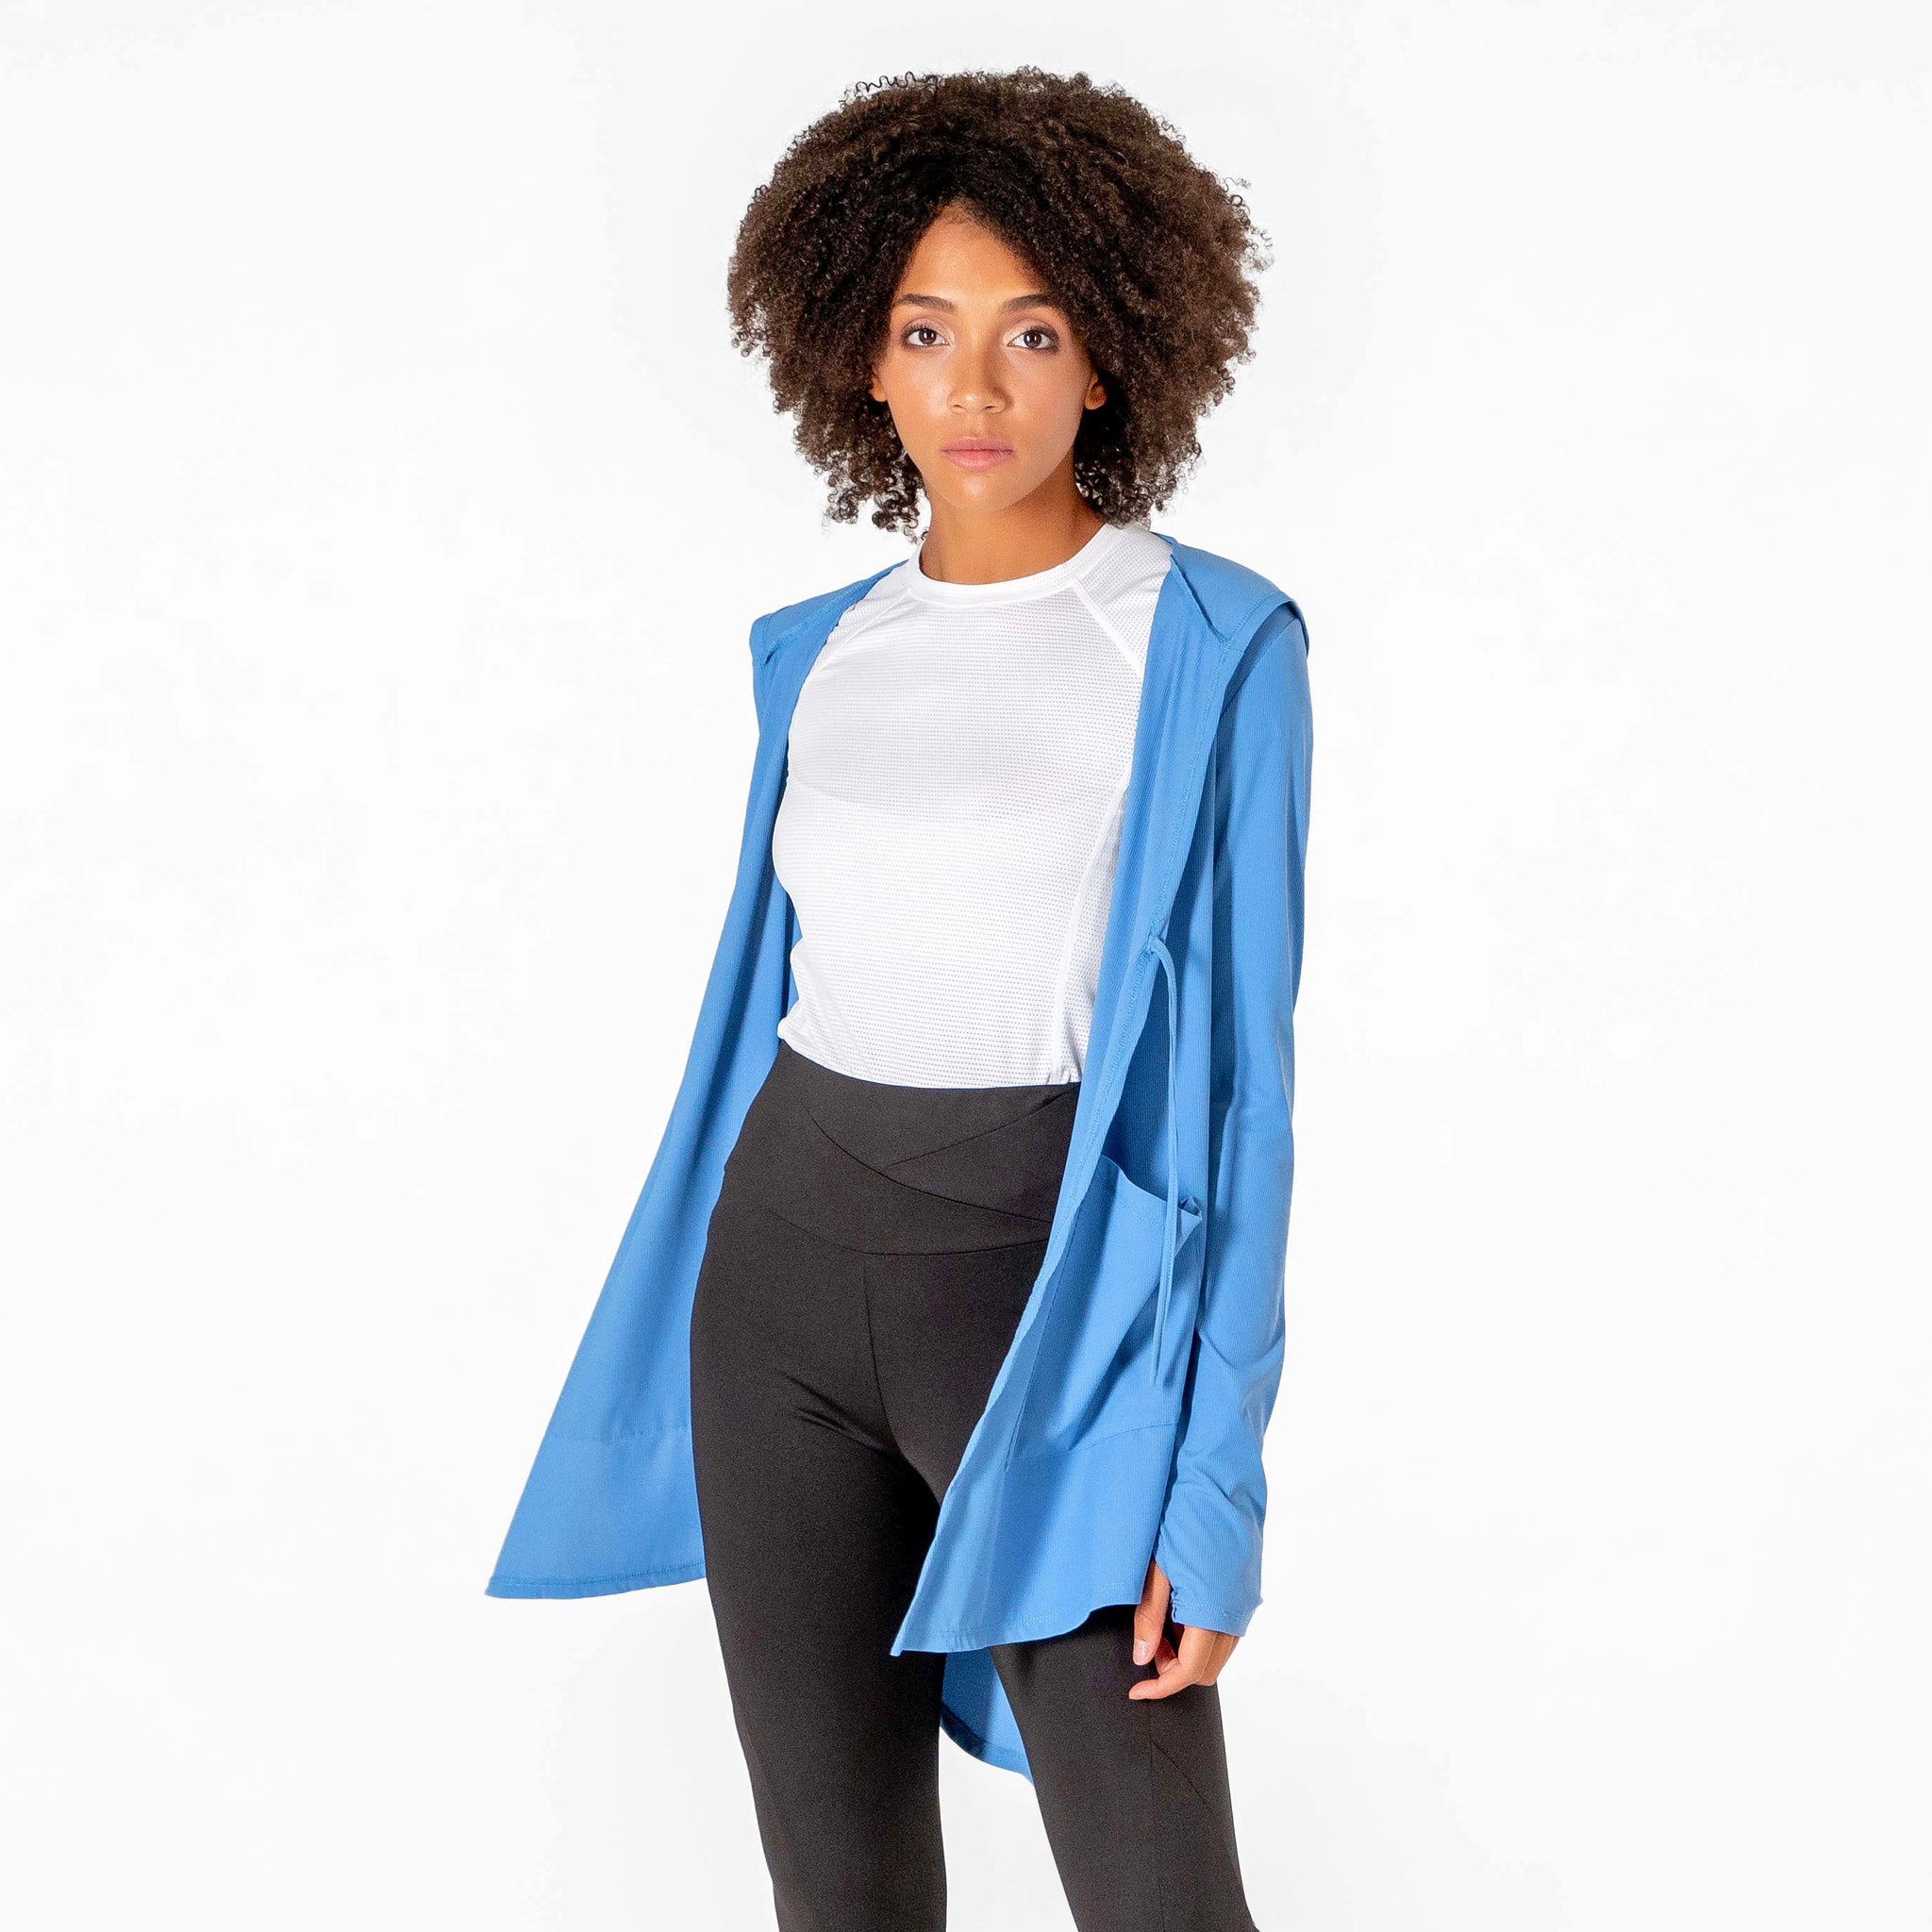 Move It Cardigan in light blue by Veil Garments. Modest activewear collection.